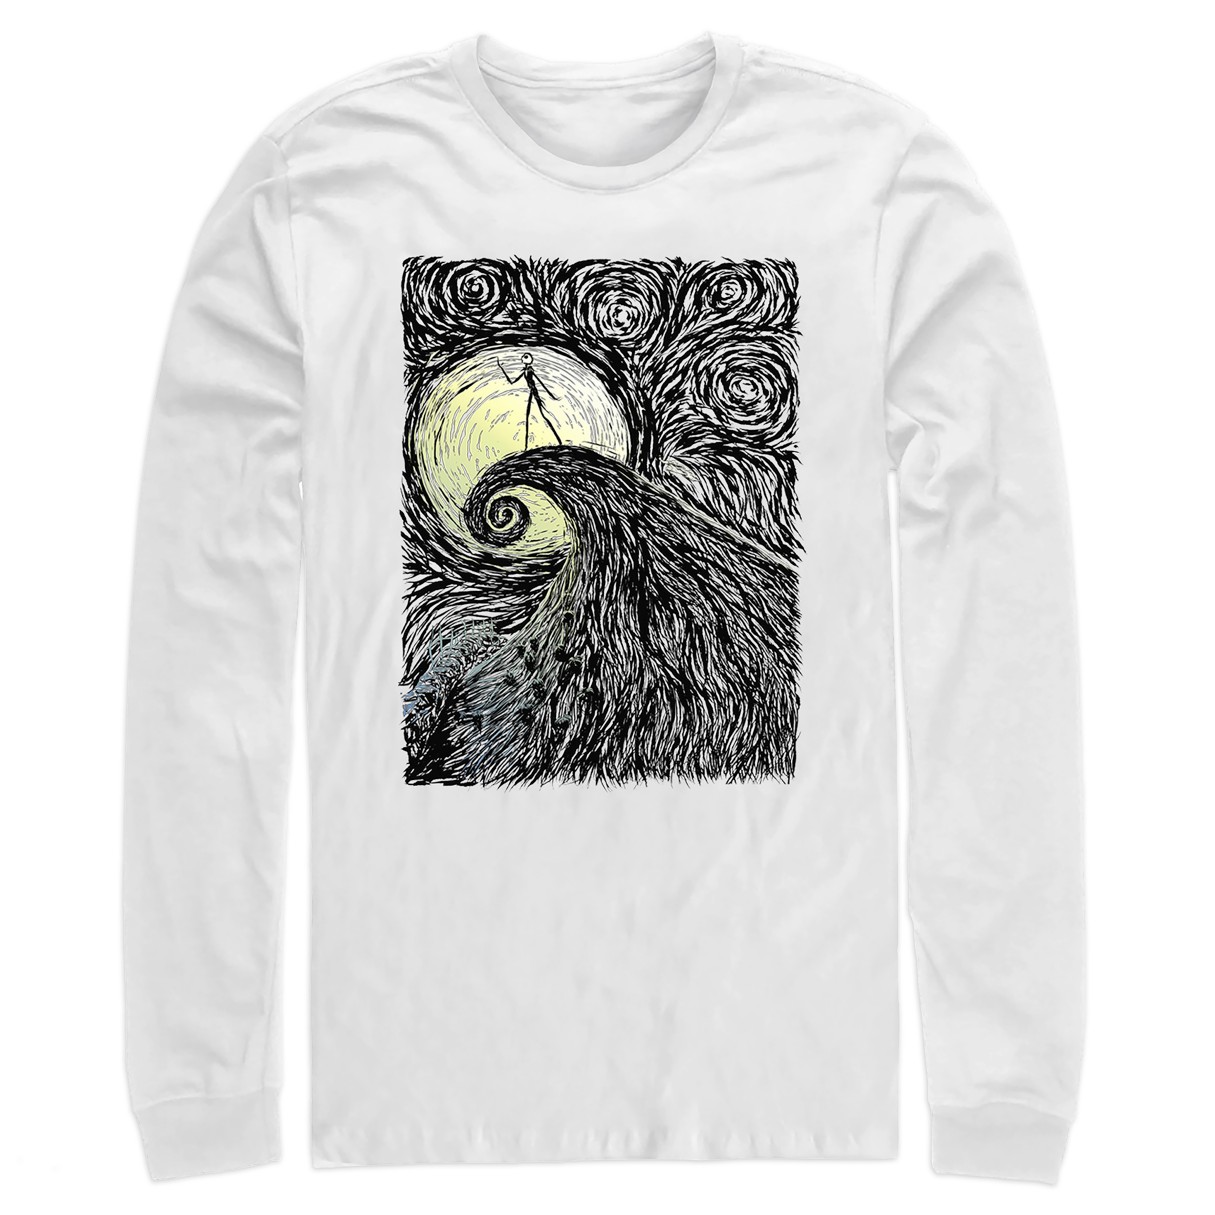 Jack Skellington Long Sleeve T-Shirt for Adults – The Nightmare Before Christmas